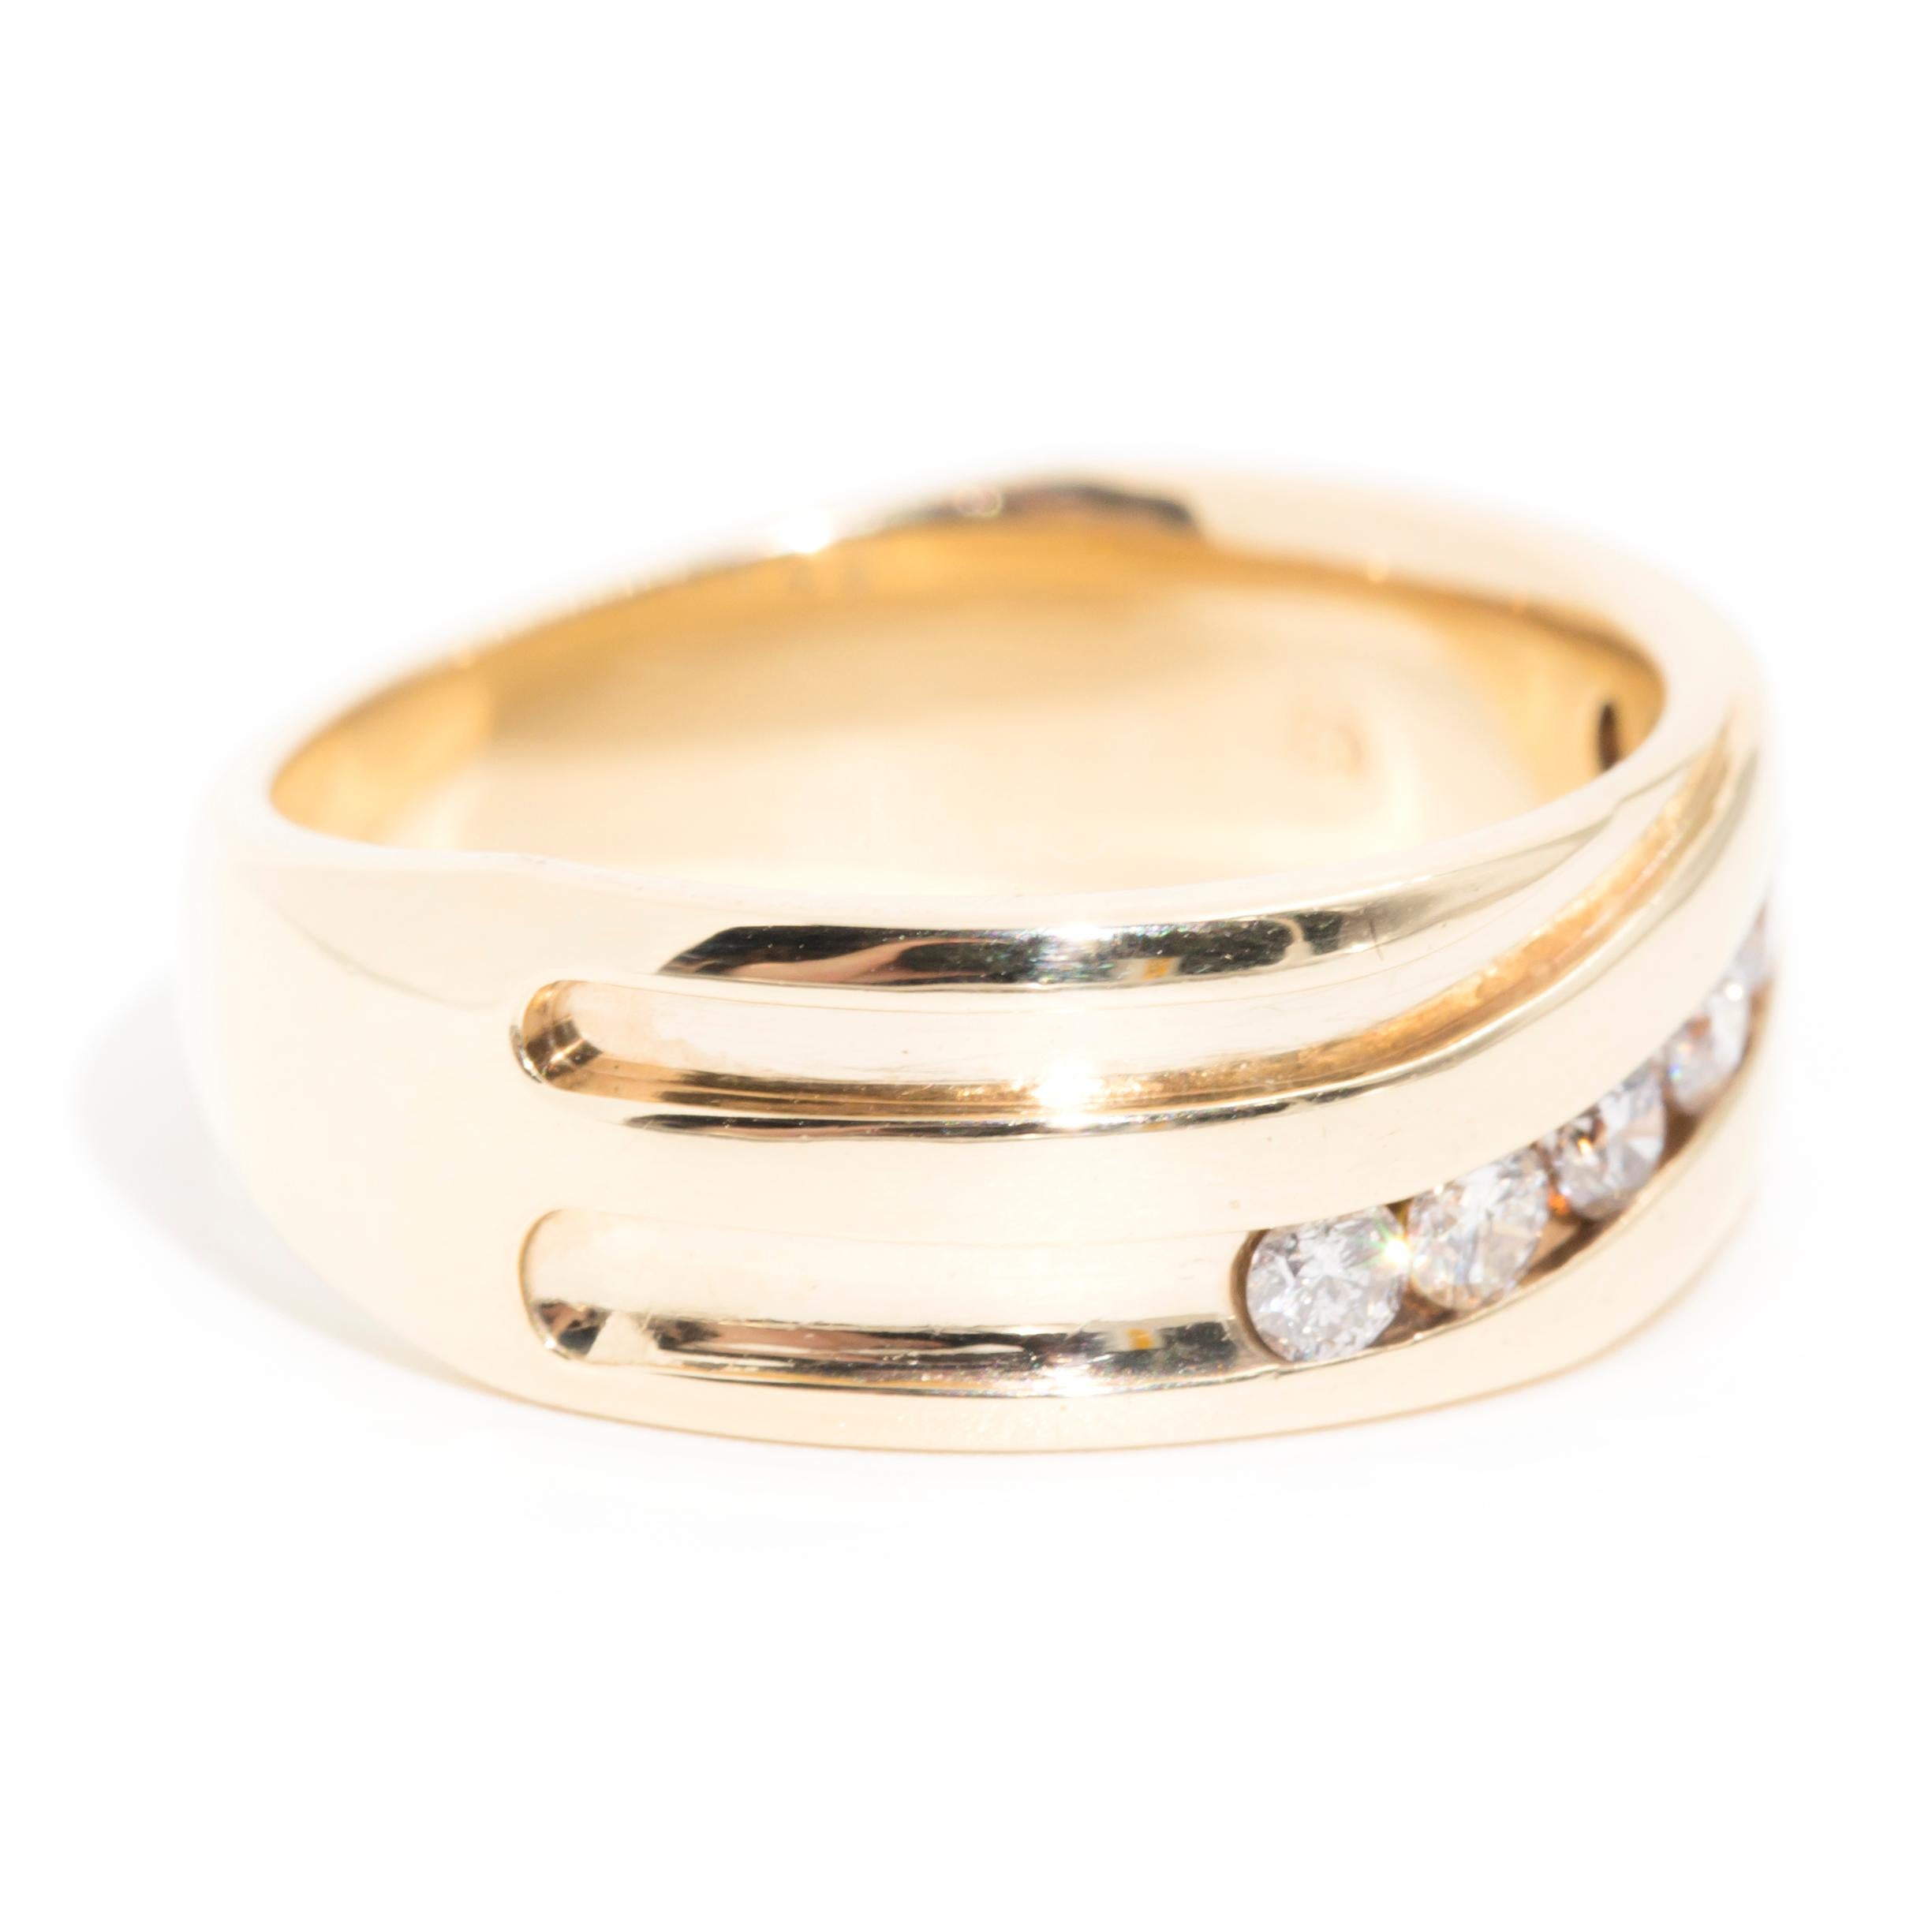 Round Cut Round Brilliant Cut Diamond Wide Men's Band Ring in 9 Carat Yellow Gold